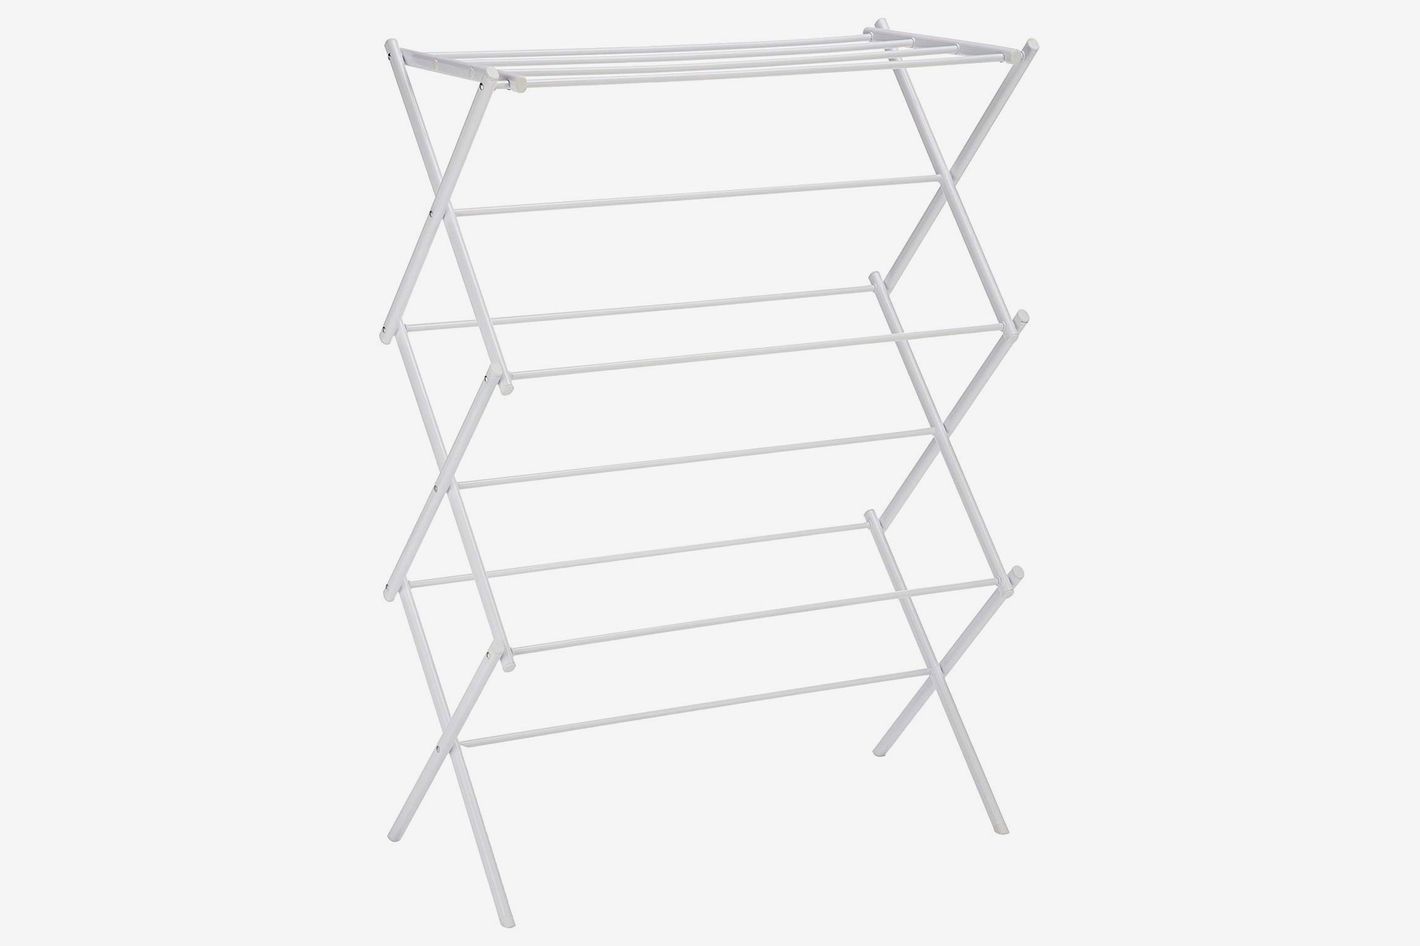 Square, 40-Clips JAUREE Clothes Drying Rack Stainless Steel Laundry Hanging Rack for Balcony and Courtyard Suitable for Socks Drying Towels and Baby Clothes Underwears